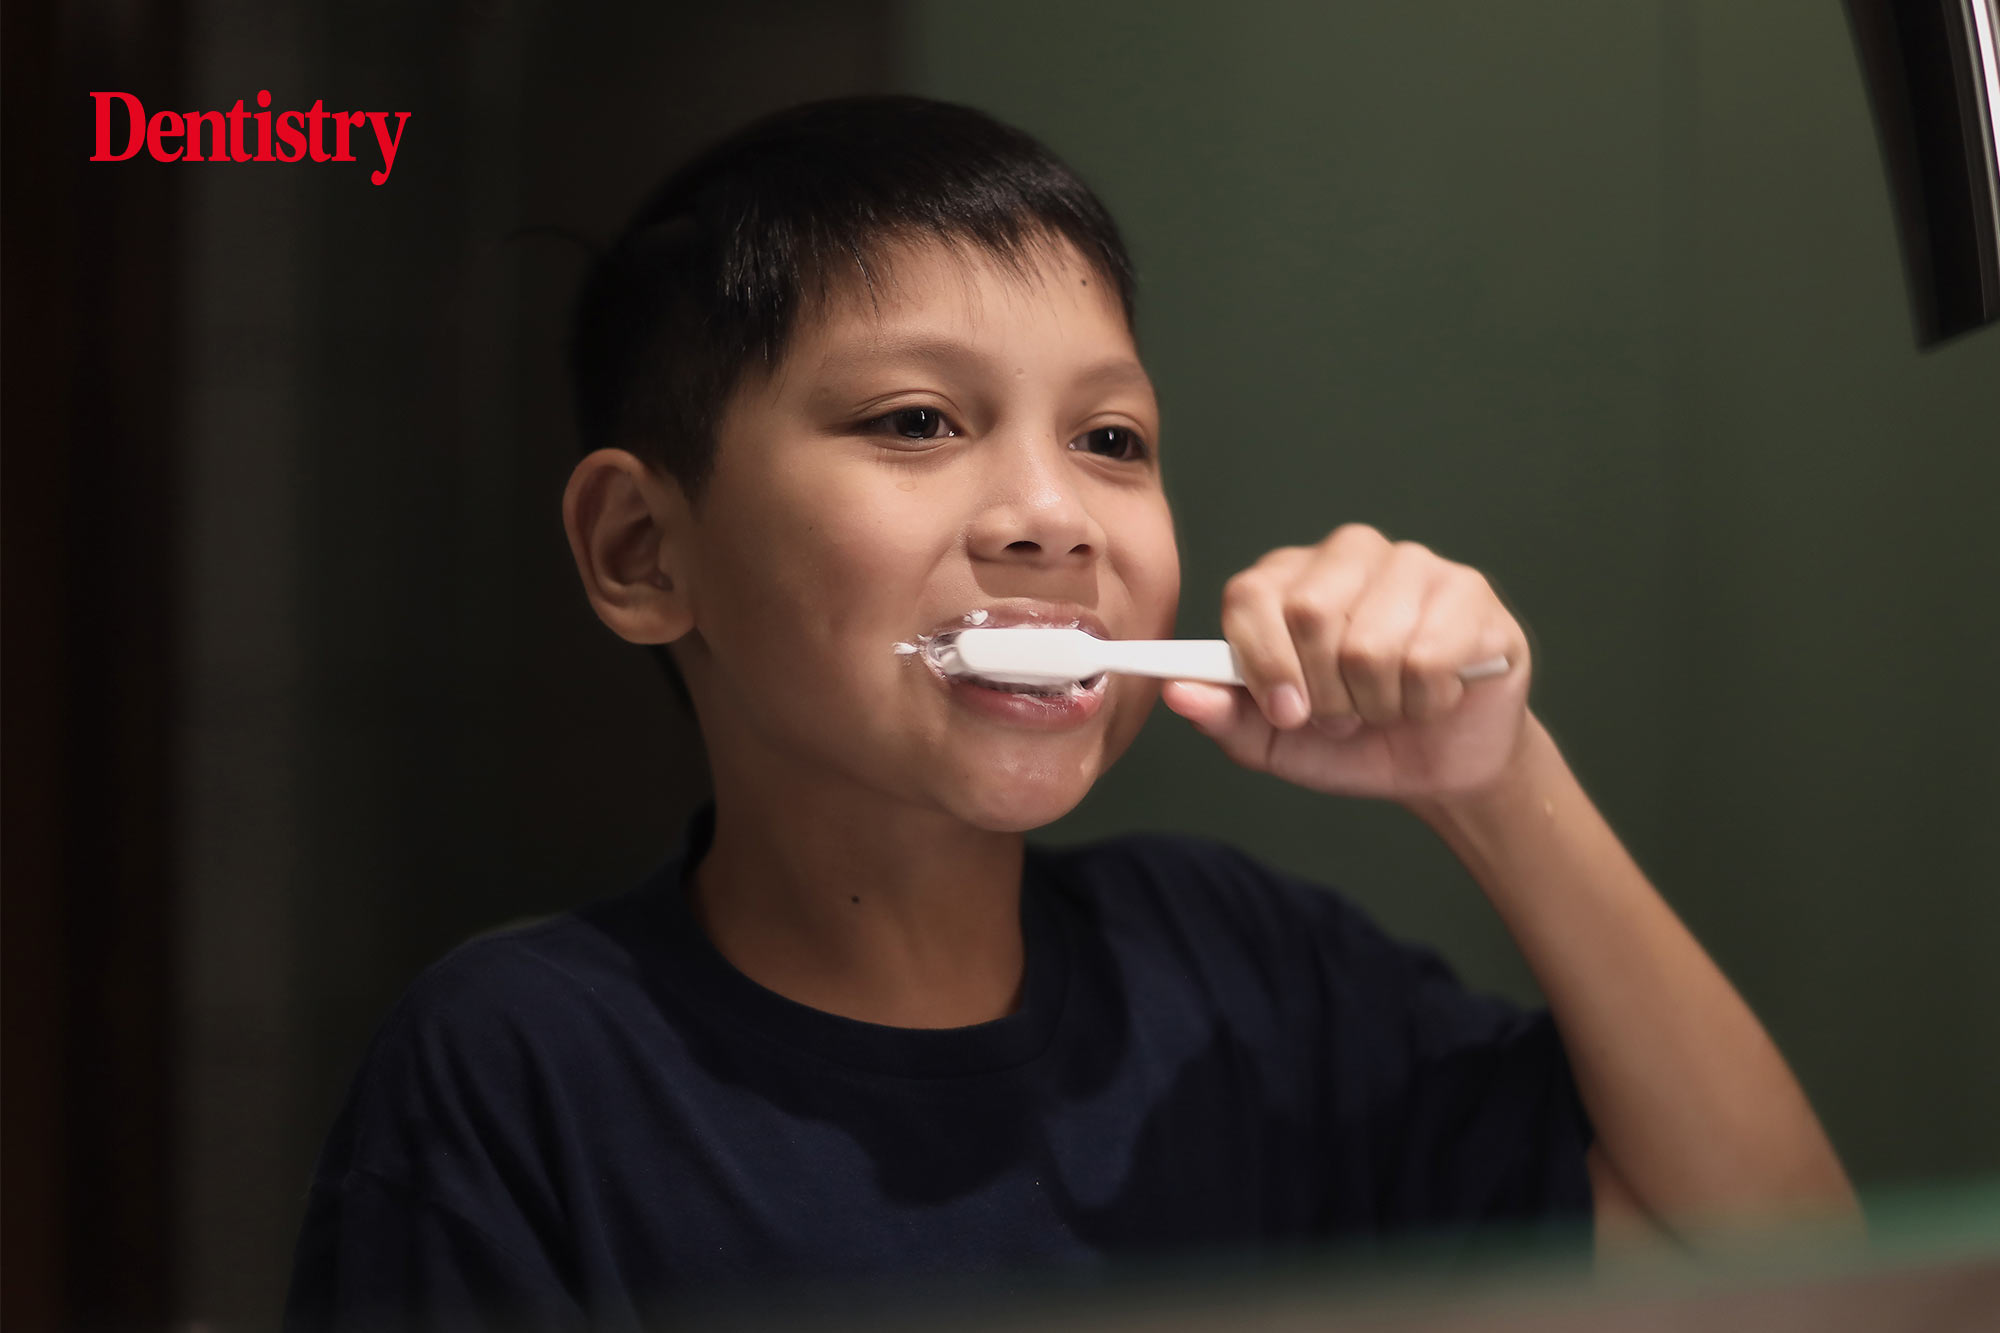 Skipping toothbrushing at night could increase risk of cardiovascular disease